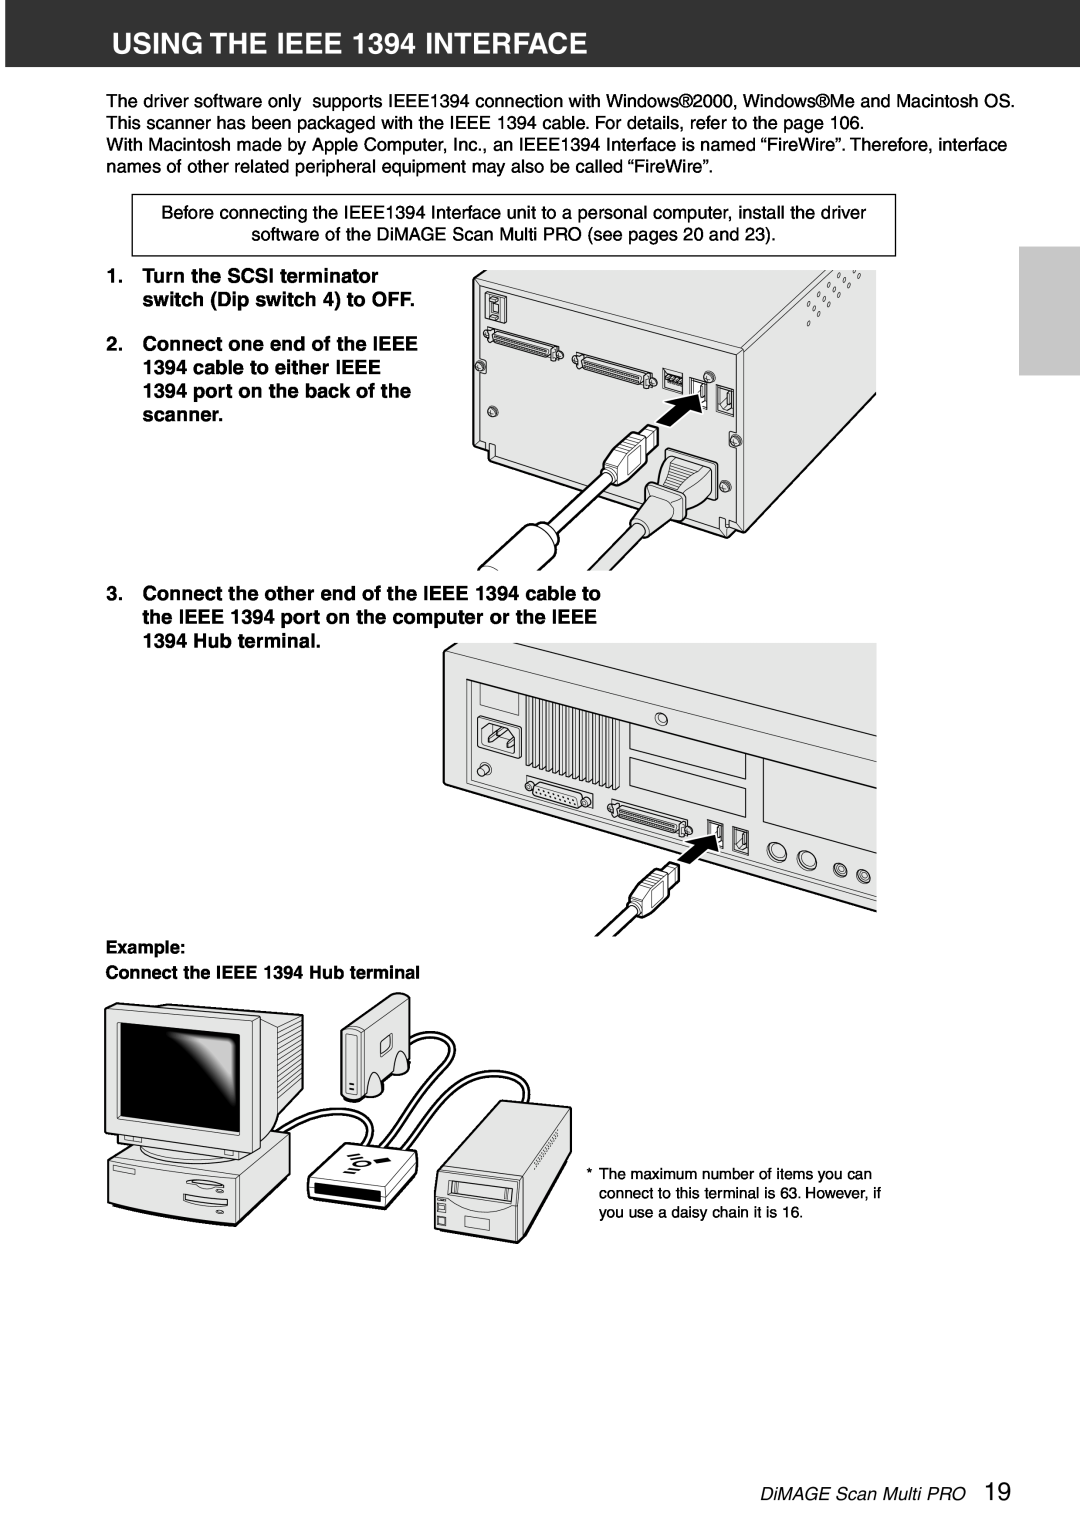 Konica Minolta Scan Multi PRO USING THE IEEE 1394 INTERFACE, Turn the SCSI terminator switch Dip switch 4 to OFF 